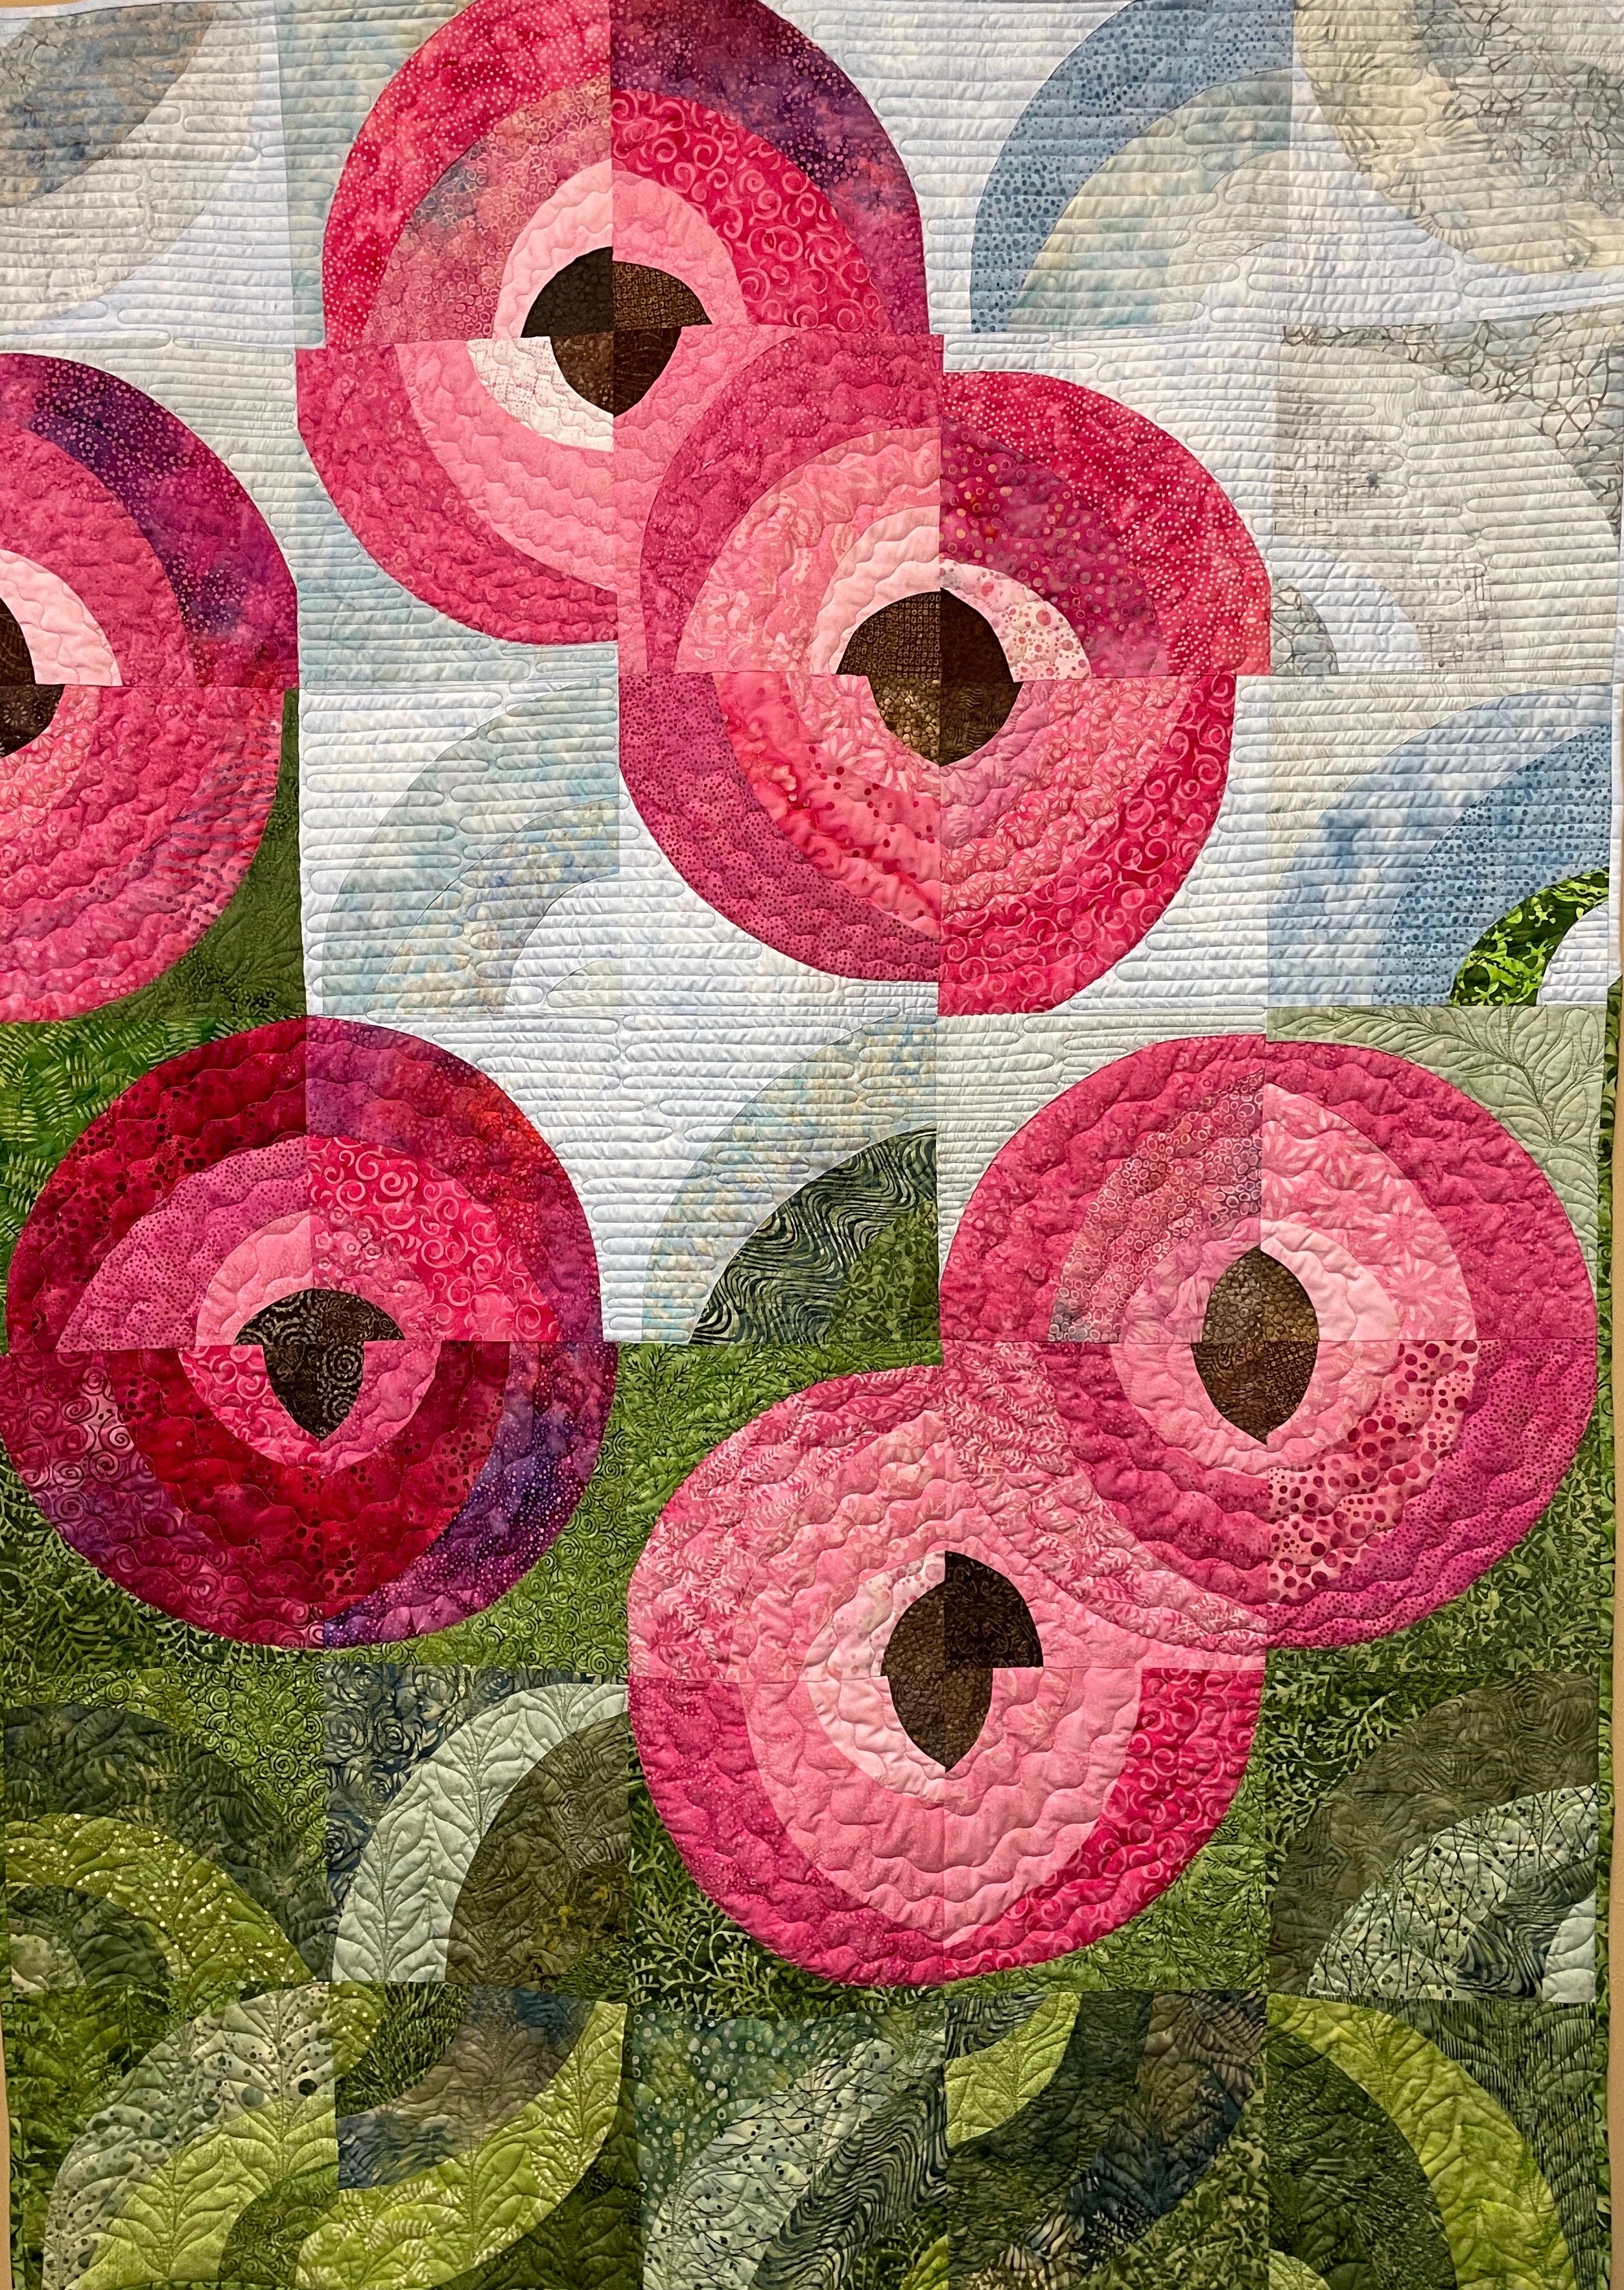 Tips to making the Cosmic Poppies Quilt